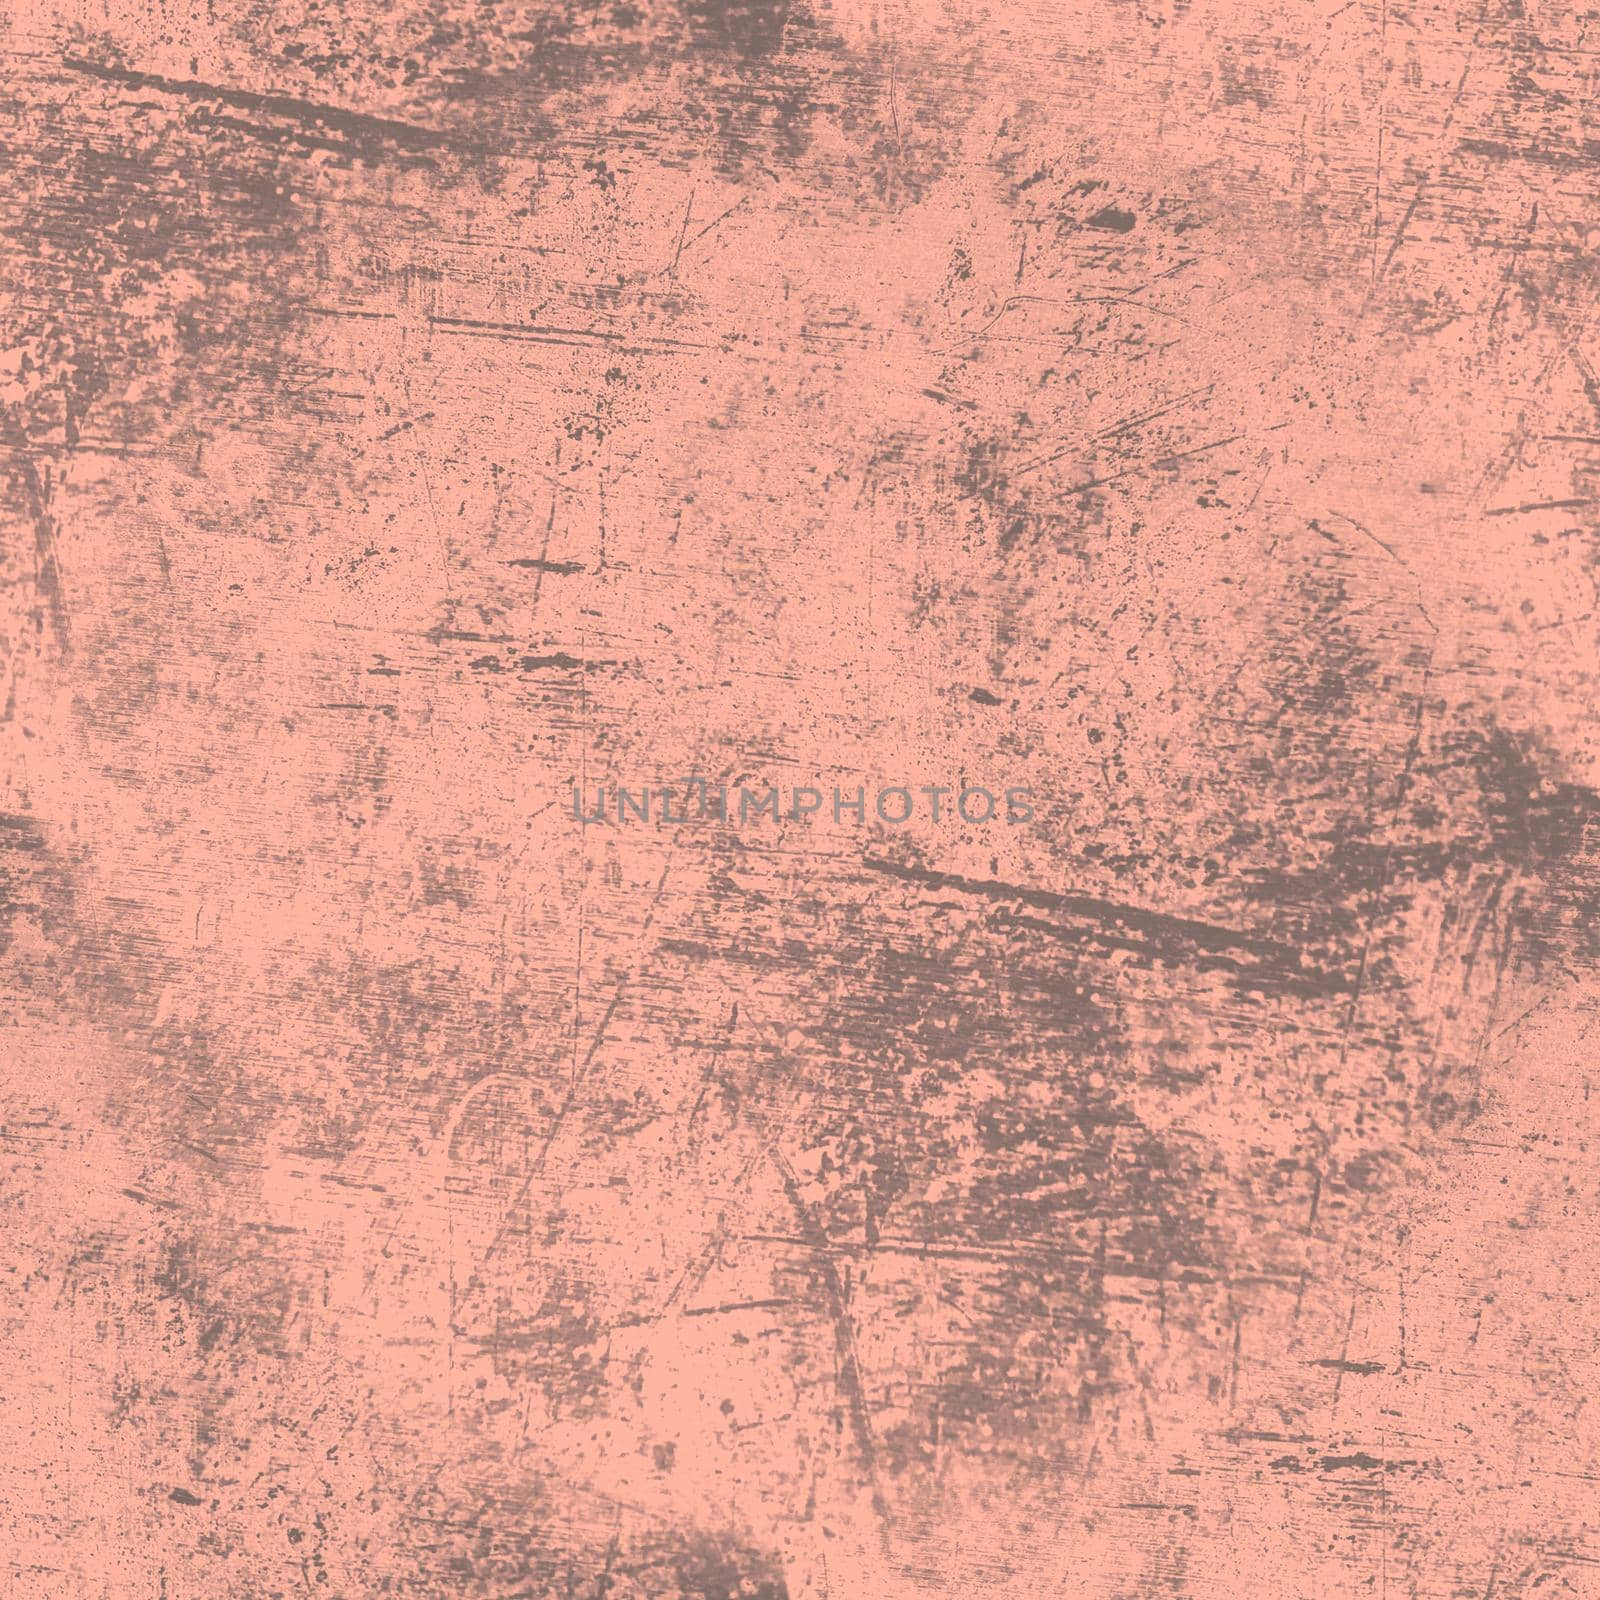 Grunge Abstract Dirty Texture. Ink Distress Illustration. Retro Brush Pattern. Rough Cement. Overlay Vintage Dust Design. Grungy Stone Stamp. Paint Grain Background. Gray Old Dirty Texture.